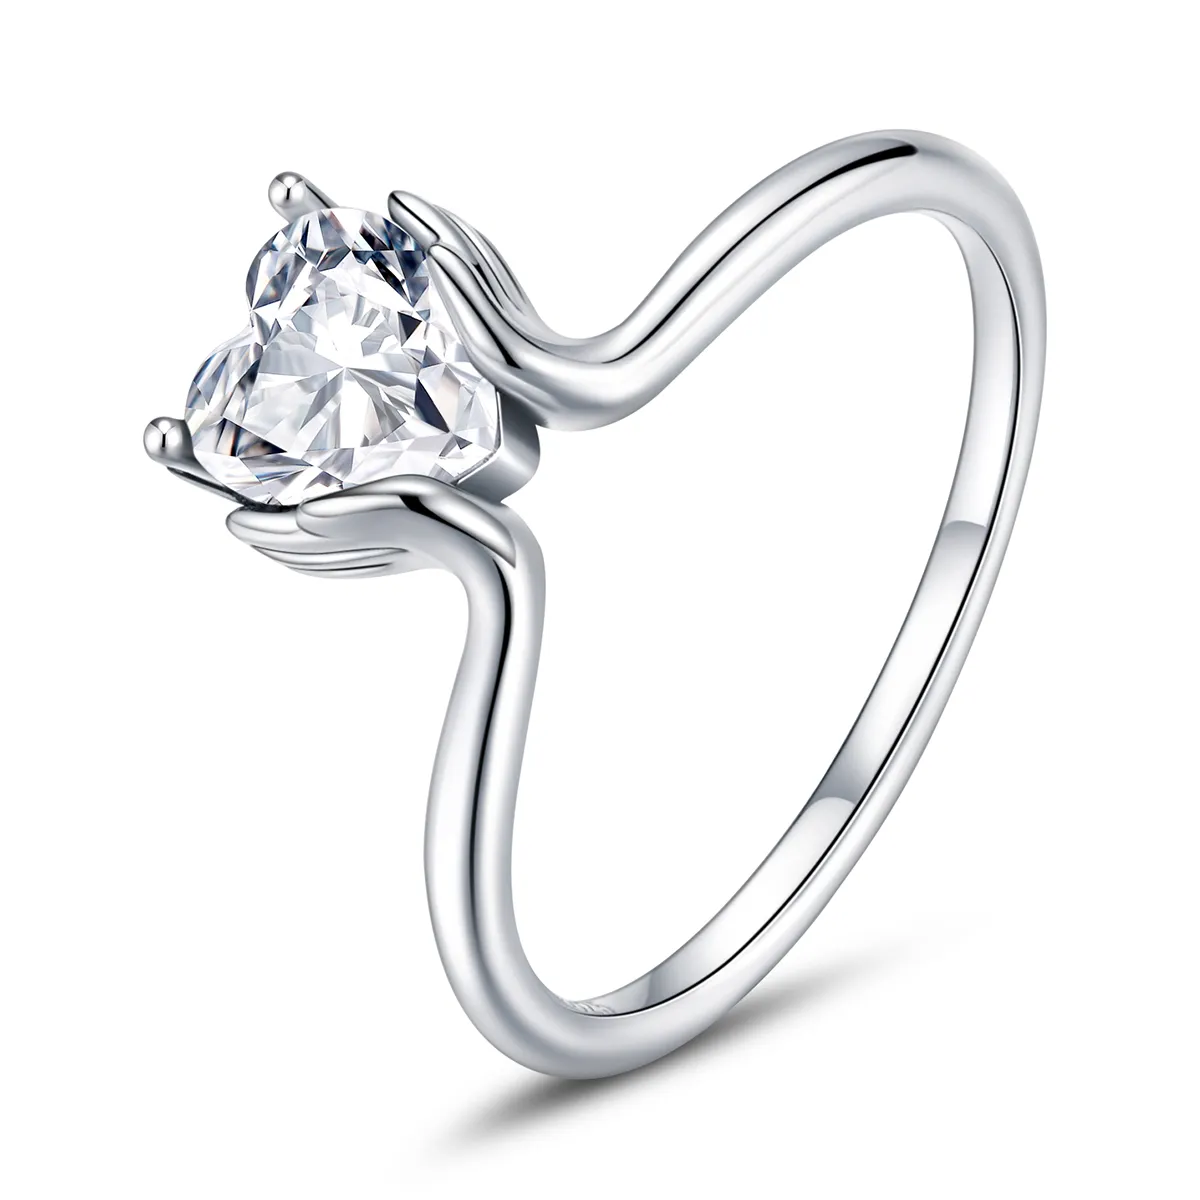 Pandora Style Silver Engagements Ring - SCR729